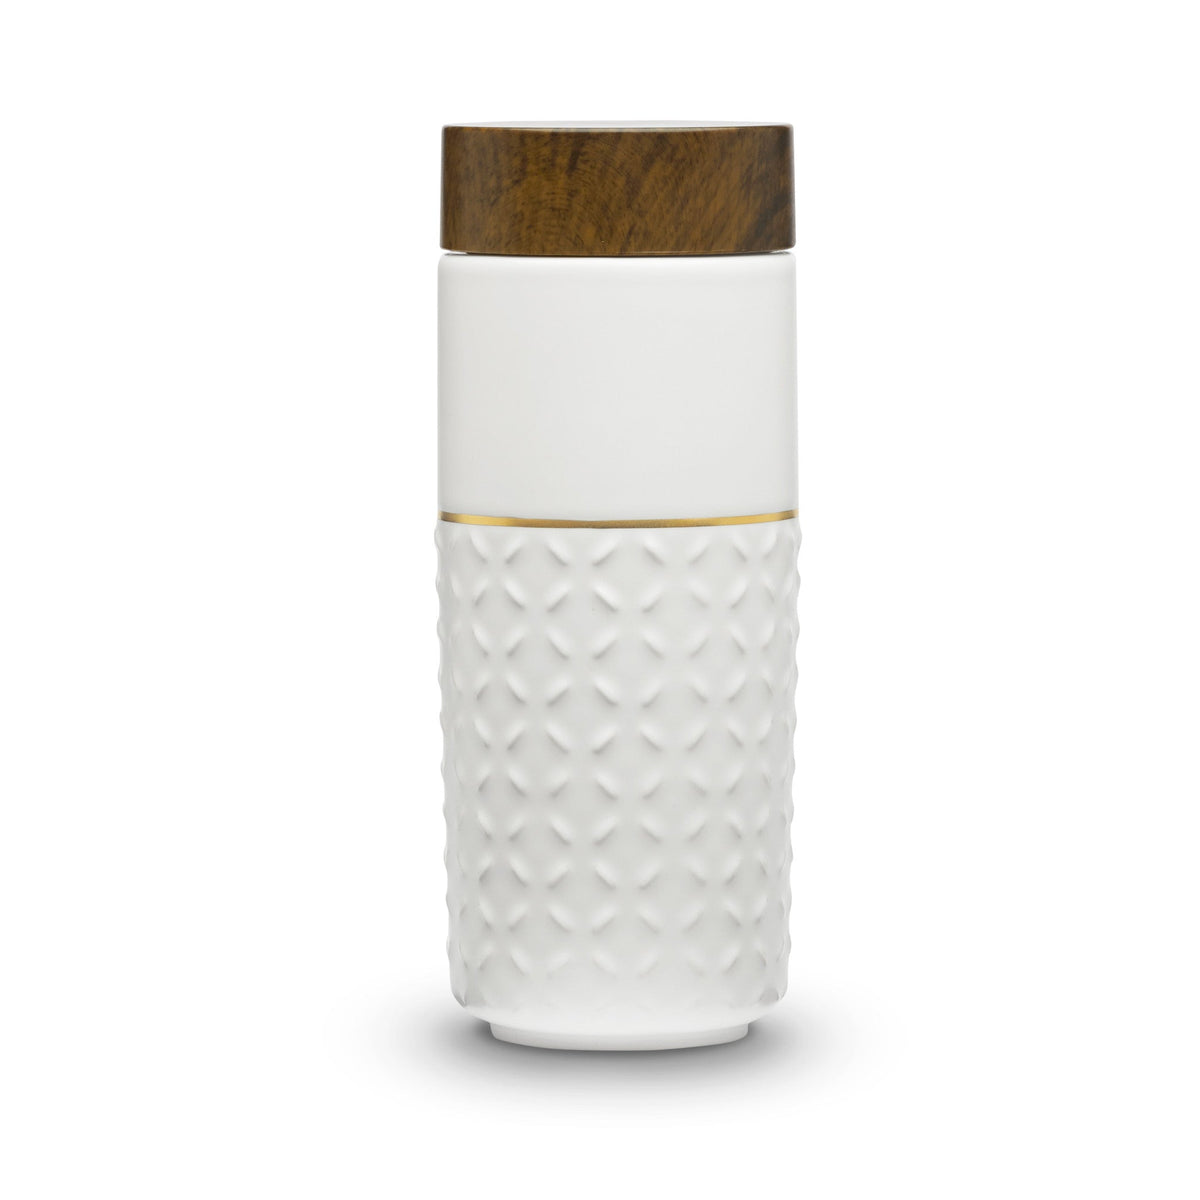 One-O-One / Dreamy Starry Sky Gold Ceramic Tumbler by ACERA LIVEN